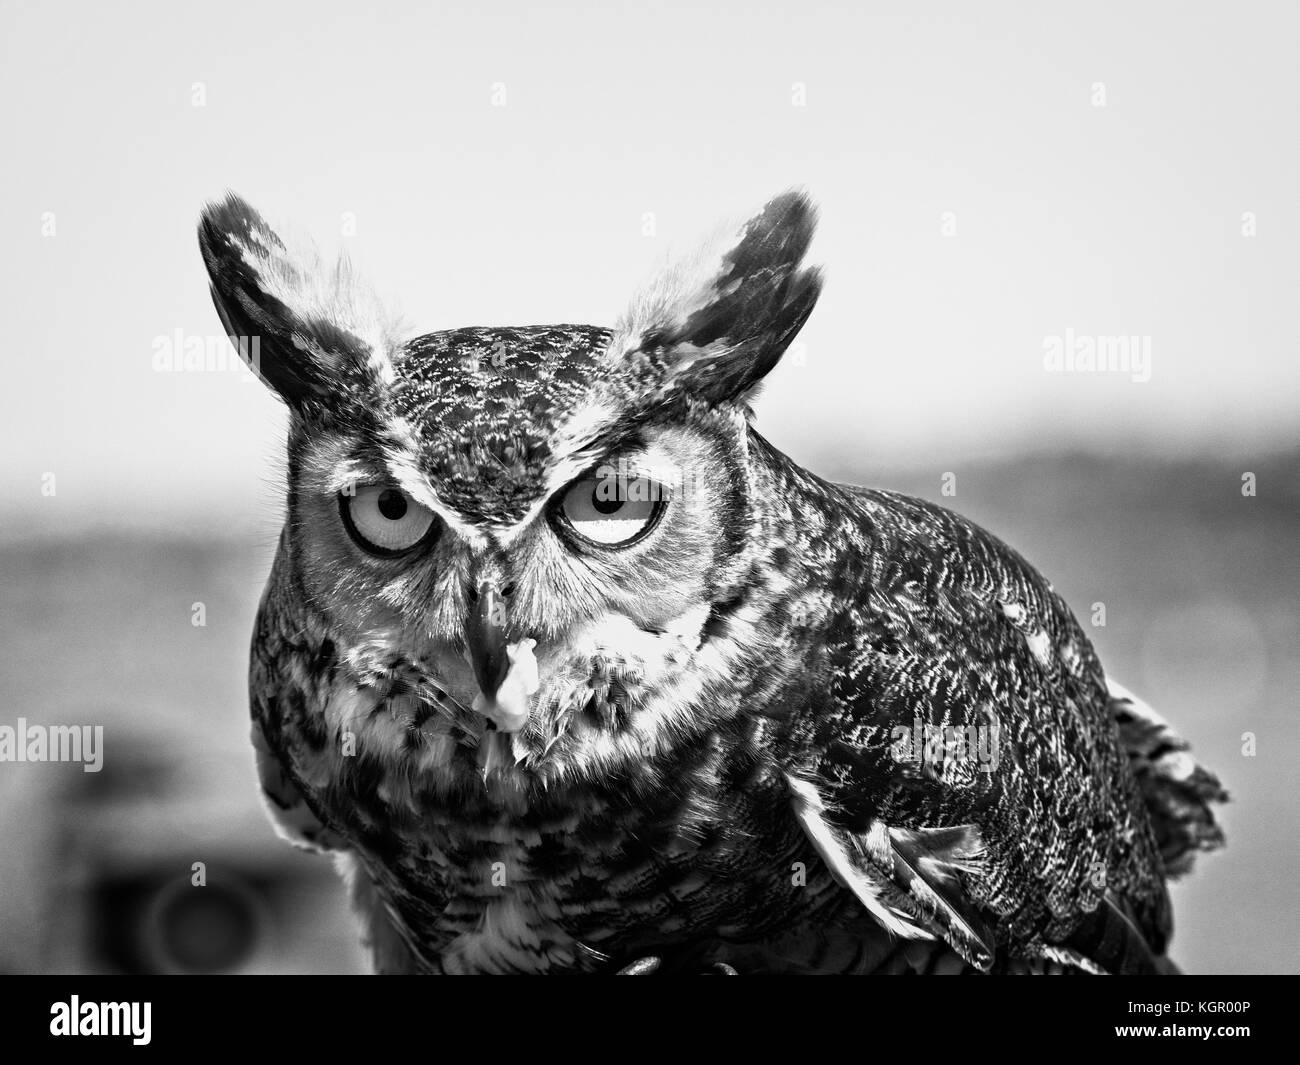 Südosten von TX USA - 1. April 2017 - Great Horned Owl with Food looking the camera in B&W Stockfoto